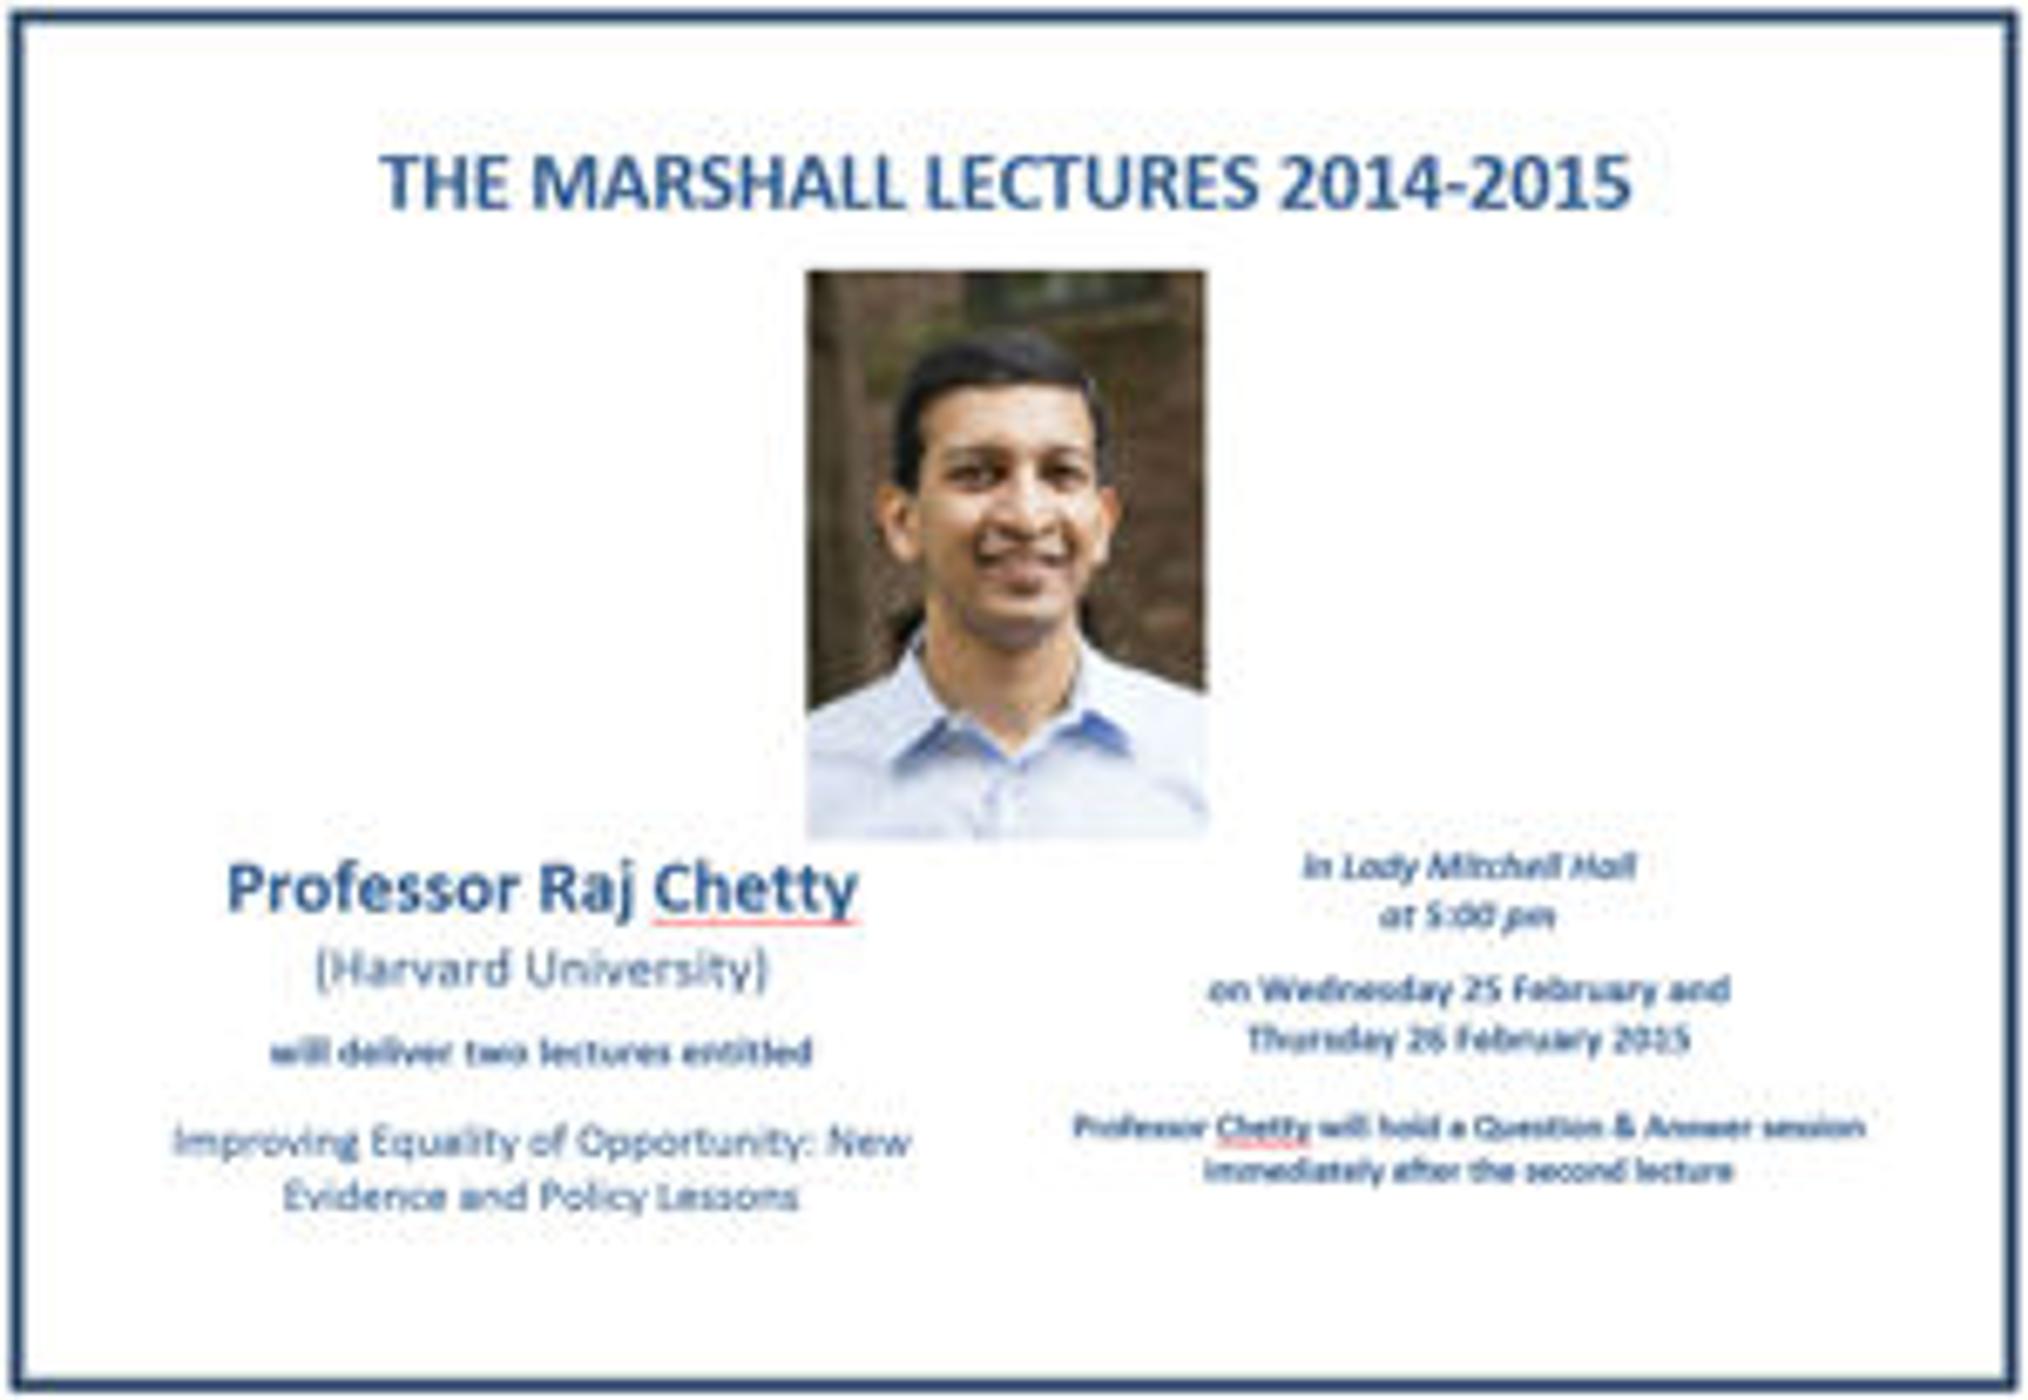 Marshall Lecture 2014-2015 Professor Raj Chetty - Improving Equality of Opportunity: New Evidence and Policy Lessons - Question and Answer Session